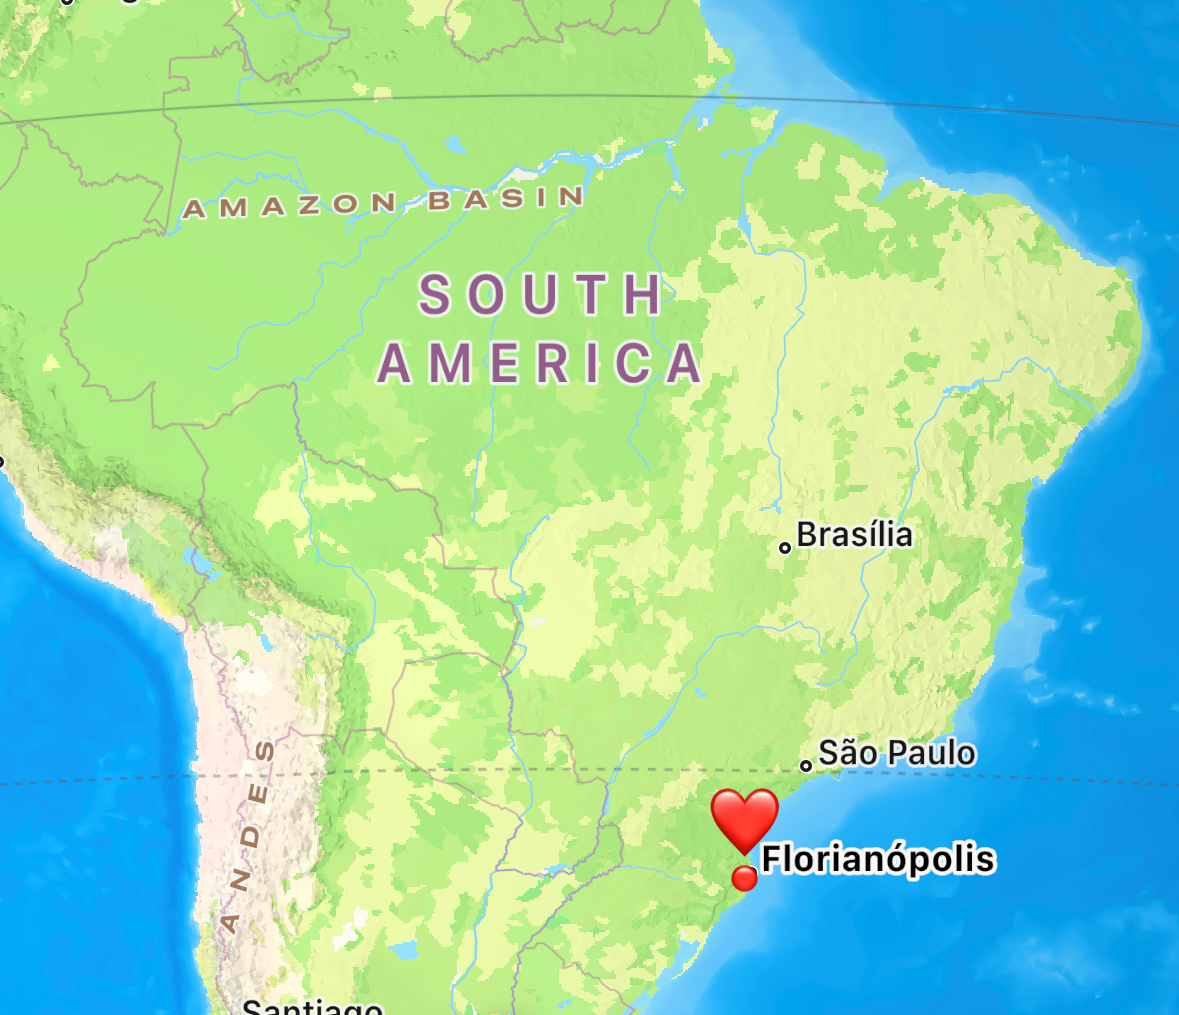 Where is Florianopolis in Brazil